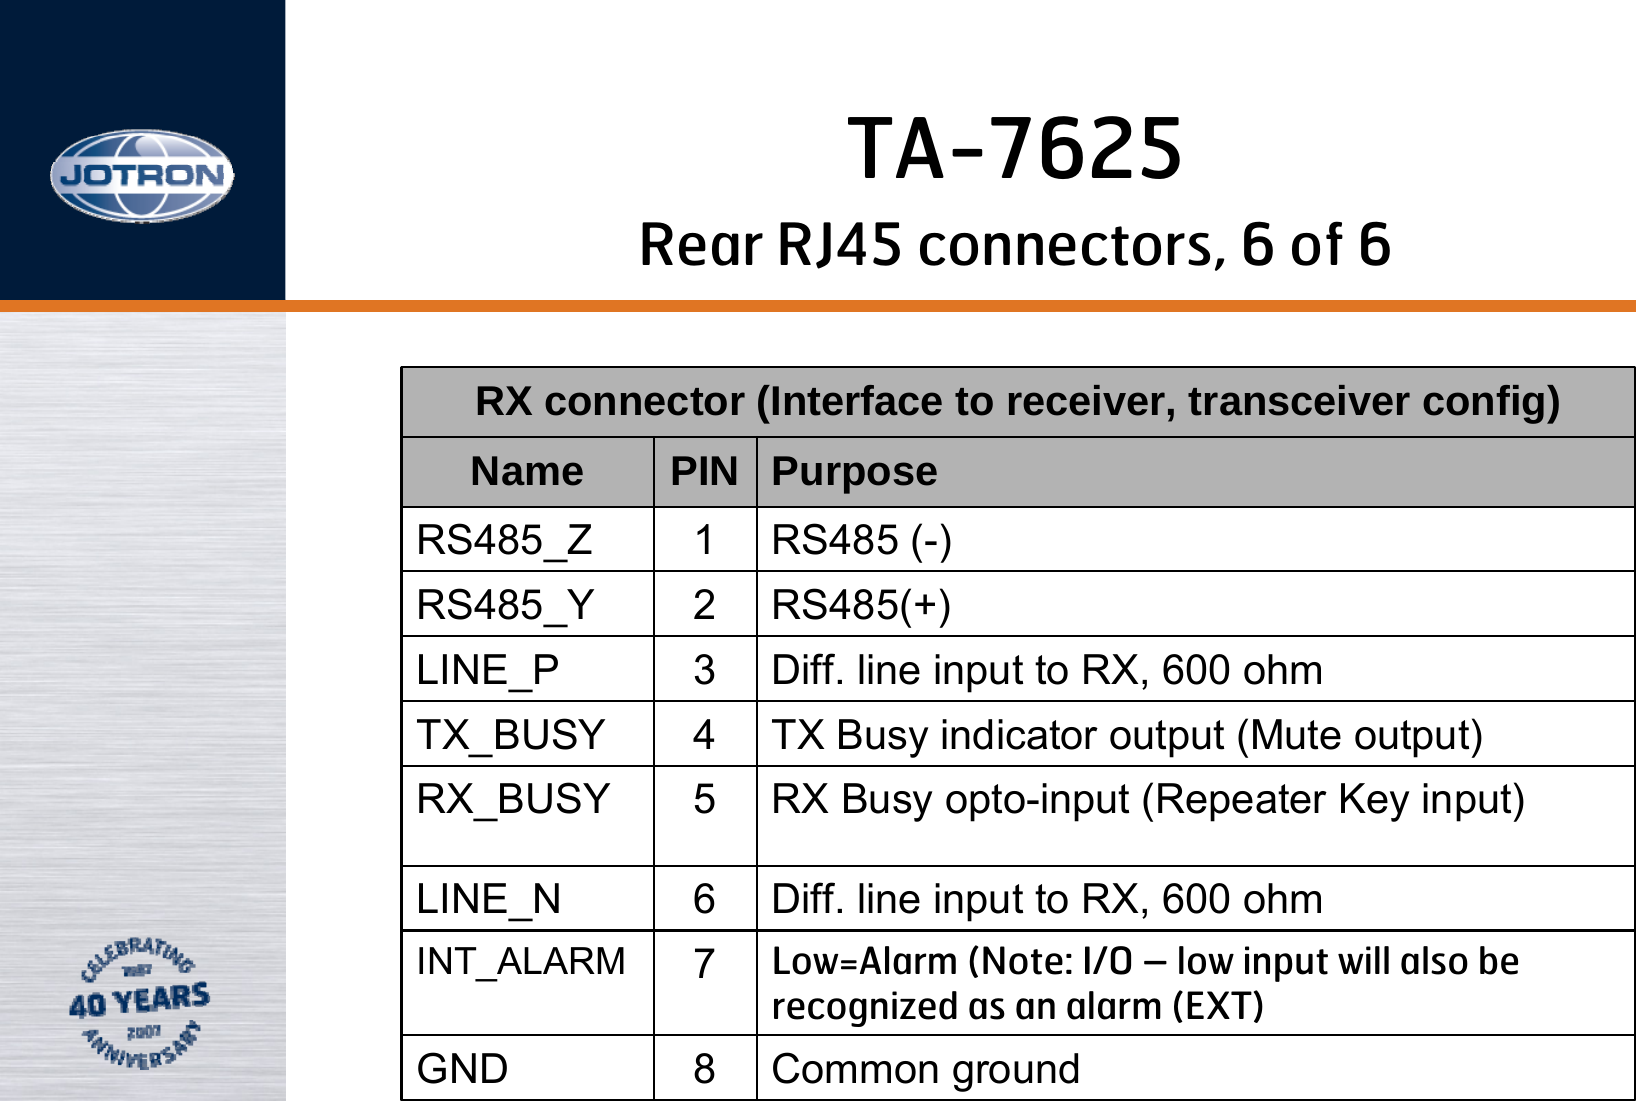 RX connector (Interface to receiver, transceiver config)Name PIN PurposeRS485_Z 1RS485 (-)RS485_Y 2RS485(+)LINE_P 3Diff. line input to RX, 600 ohmTX_BUSY 4TX Busy indicator output (Mute output)RX_BUSY 5RX Busy opto-input (Repeater Key input)LINE_N 6Diff. line input to RX, 600 ohmINT_ALARM 7Low=Alarm (Note: I/O – low input will also be recognized as an alarm (EXT)GND 8Common ground Rear RJ45 connectors, 6 of 6TA-7625